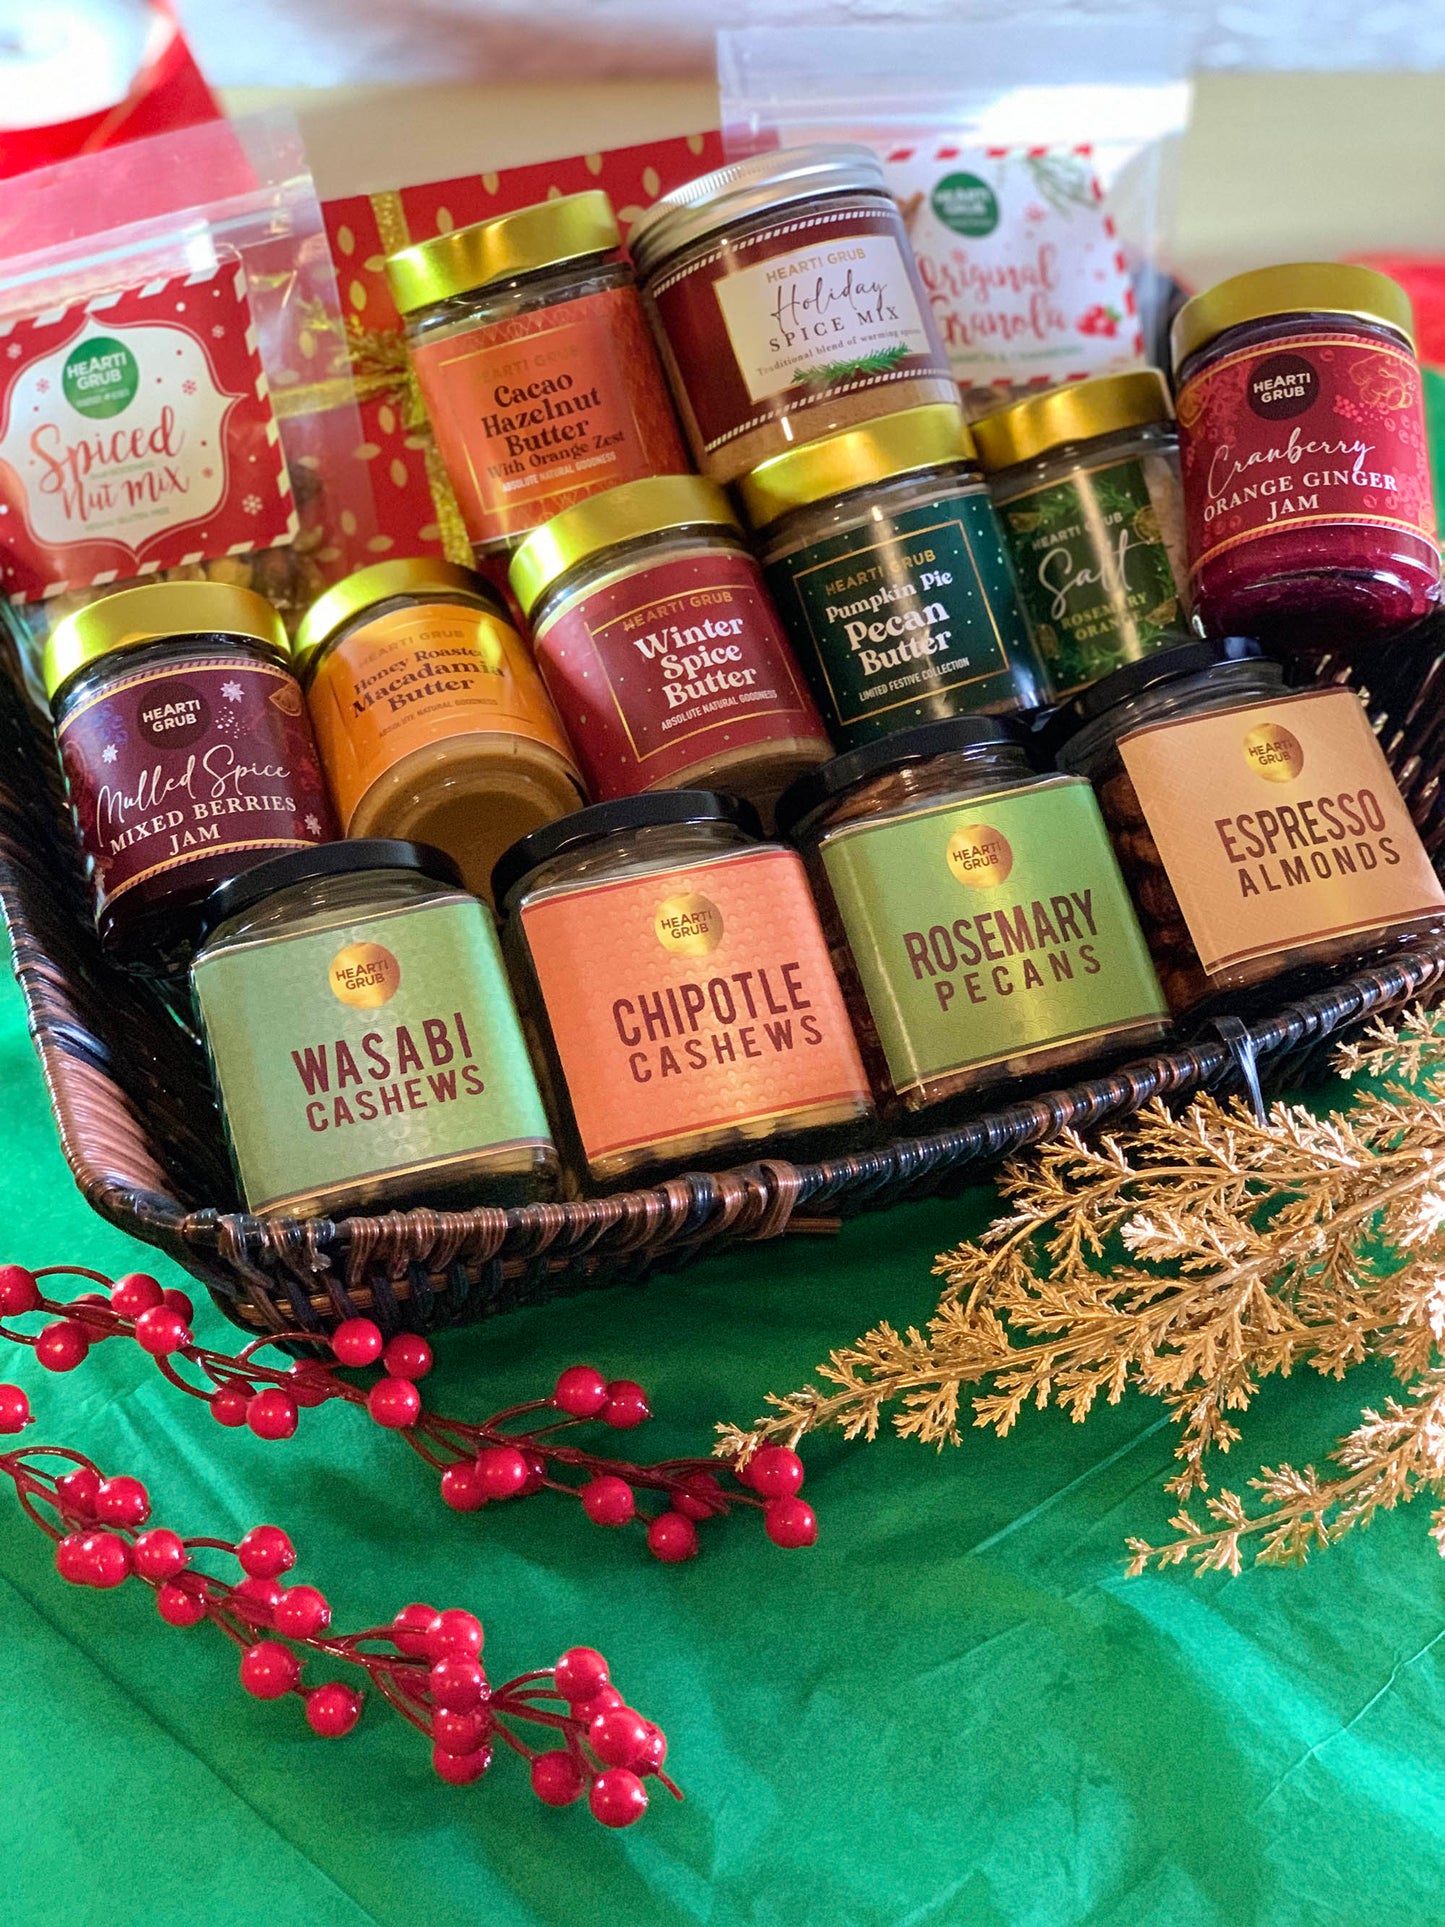 Chrsitmas Gifts. Holiday Gifts. Made in UAE. Gourmet Gifting. HeartiGrub. Nut Butters. Home Delivery.